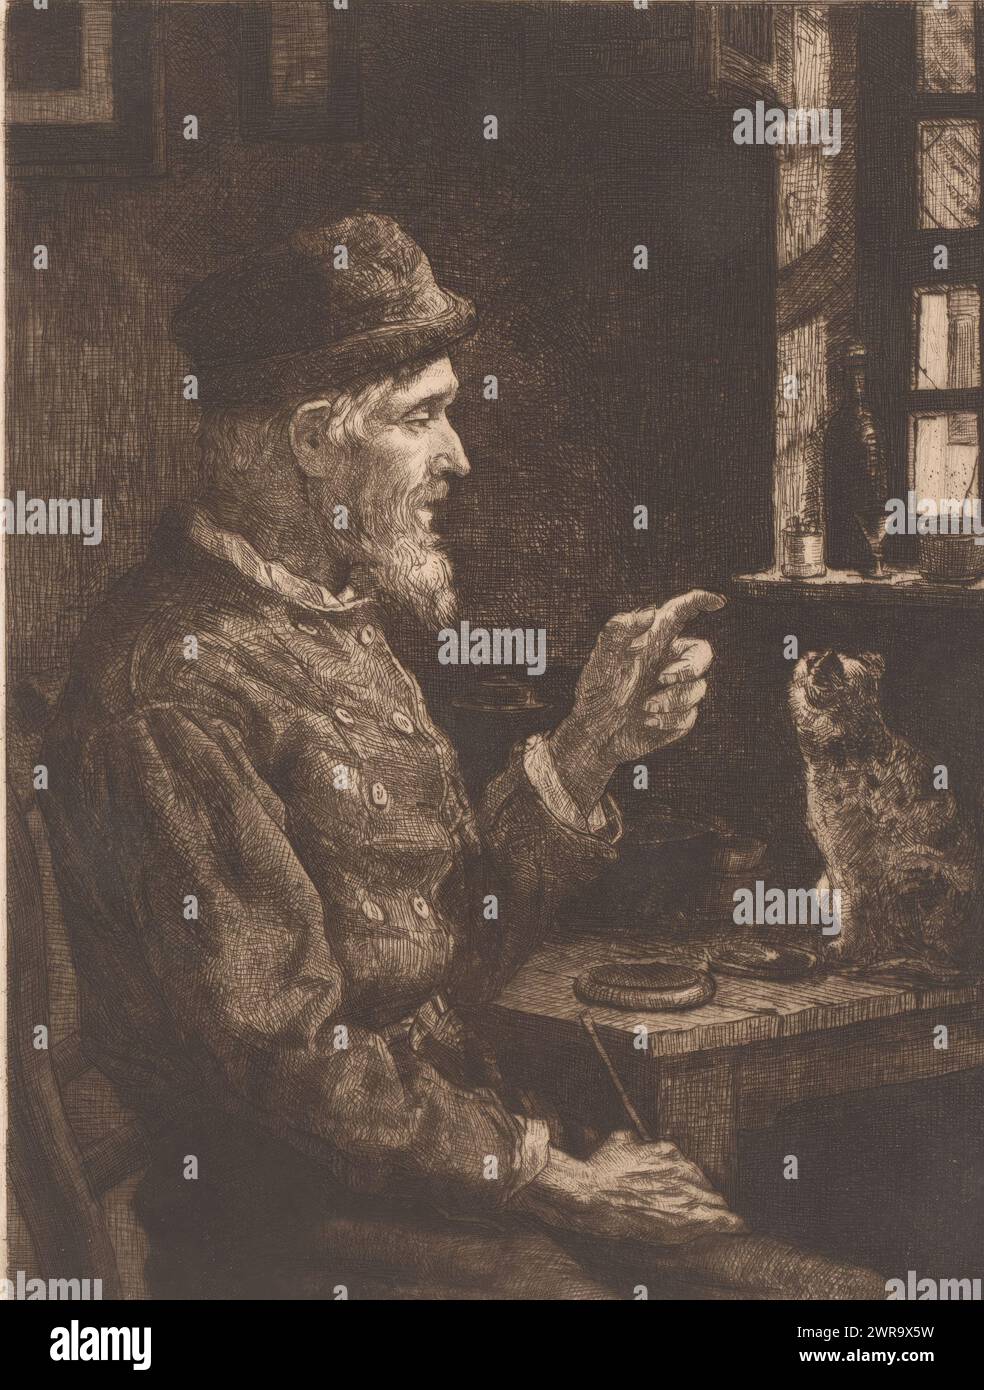 Seated man points to a cat on the table, print maker: César Geerinck, 1887, paper, etching, height 209 mm × width 160 mm, print Stock Photo